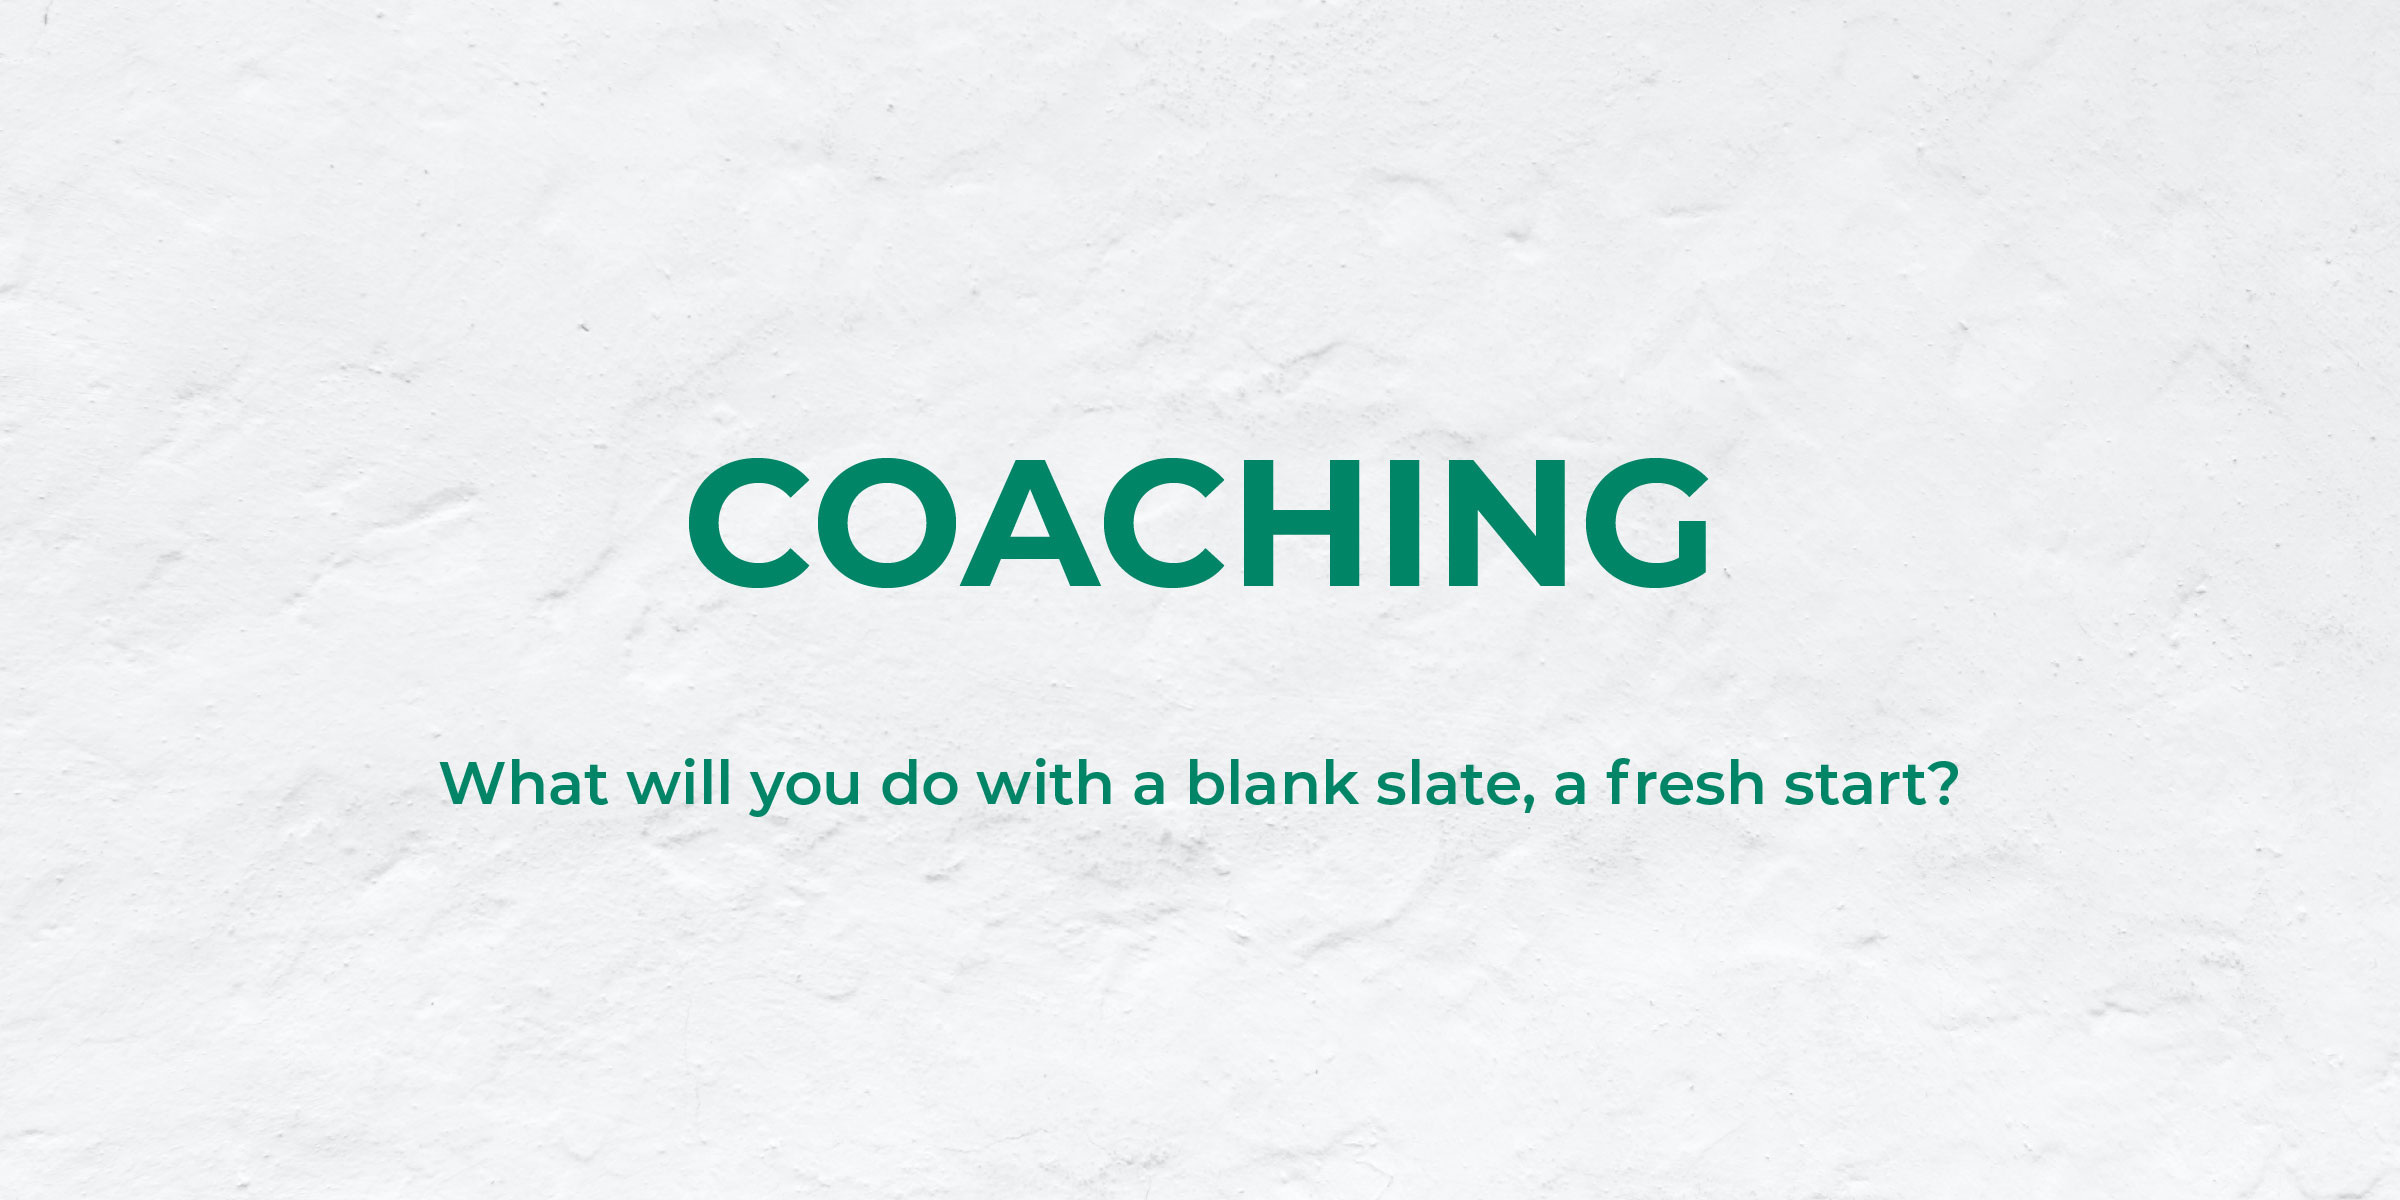 What will you do with a blank slate, a fresh start?